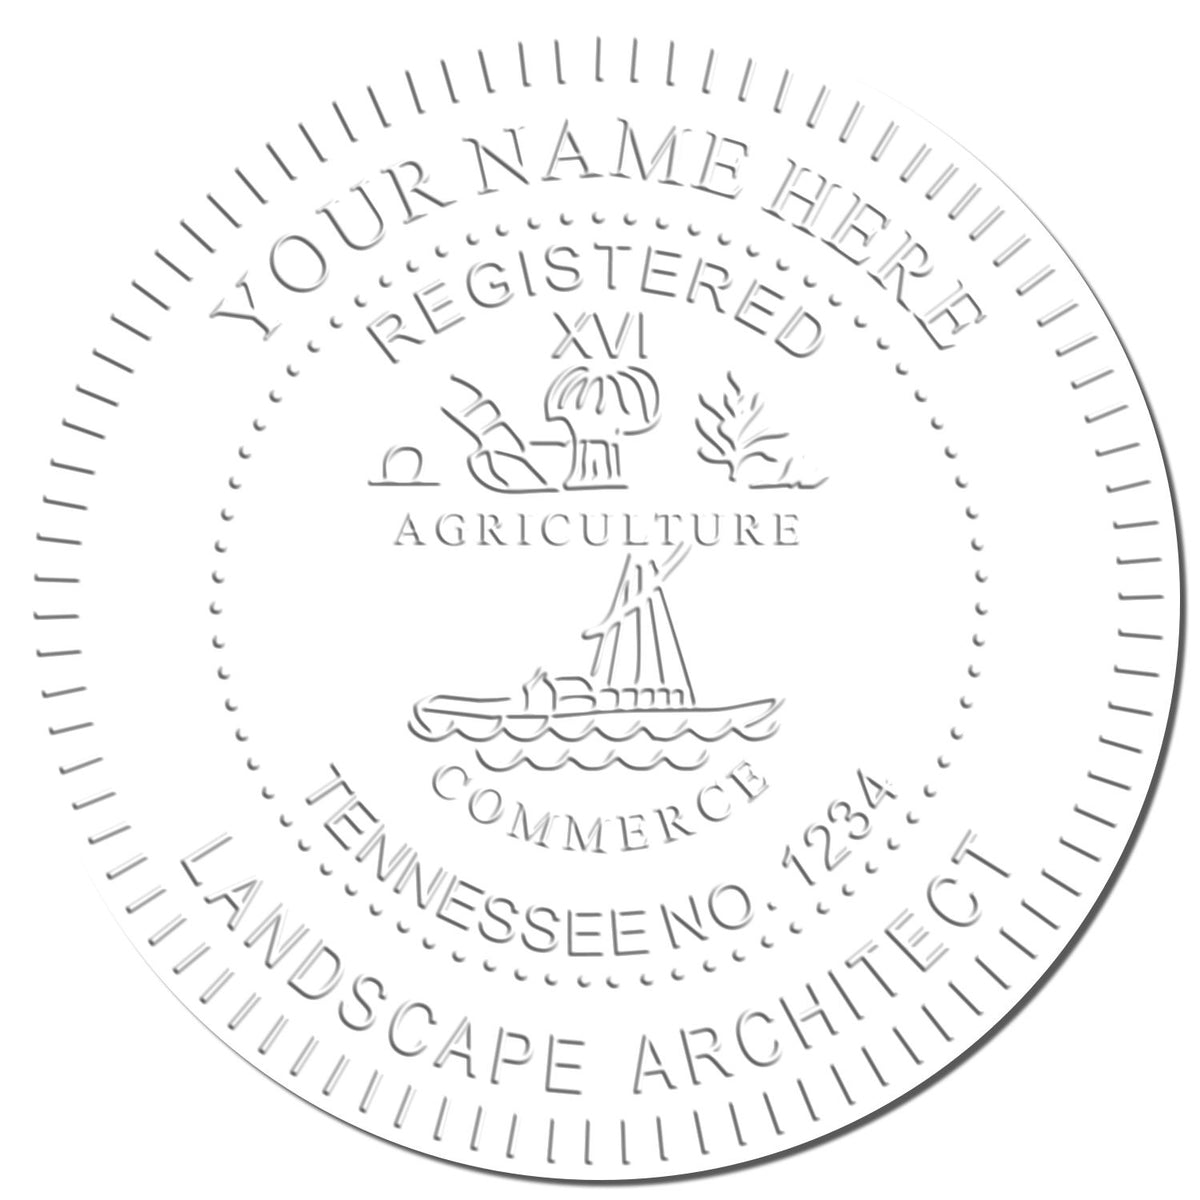 This paper is stamped with a sample imprint of the Hybrid Tennessee Landscape Architect Seal, signifying its quality and reliability.